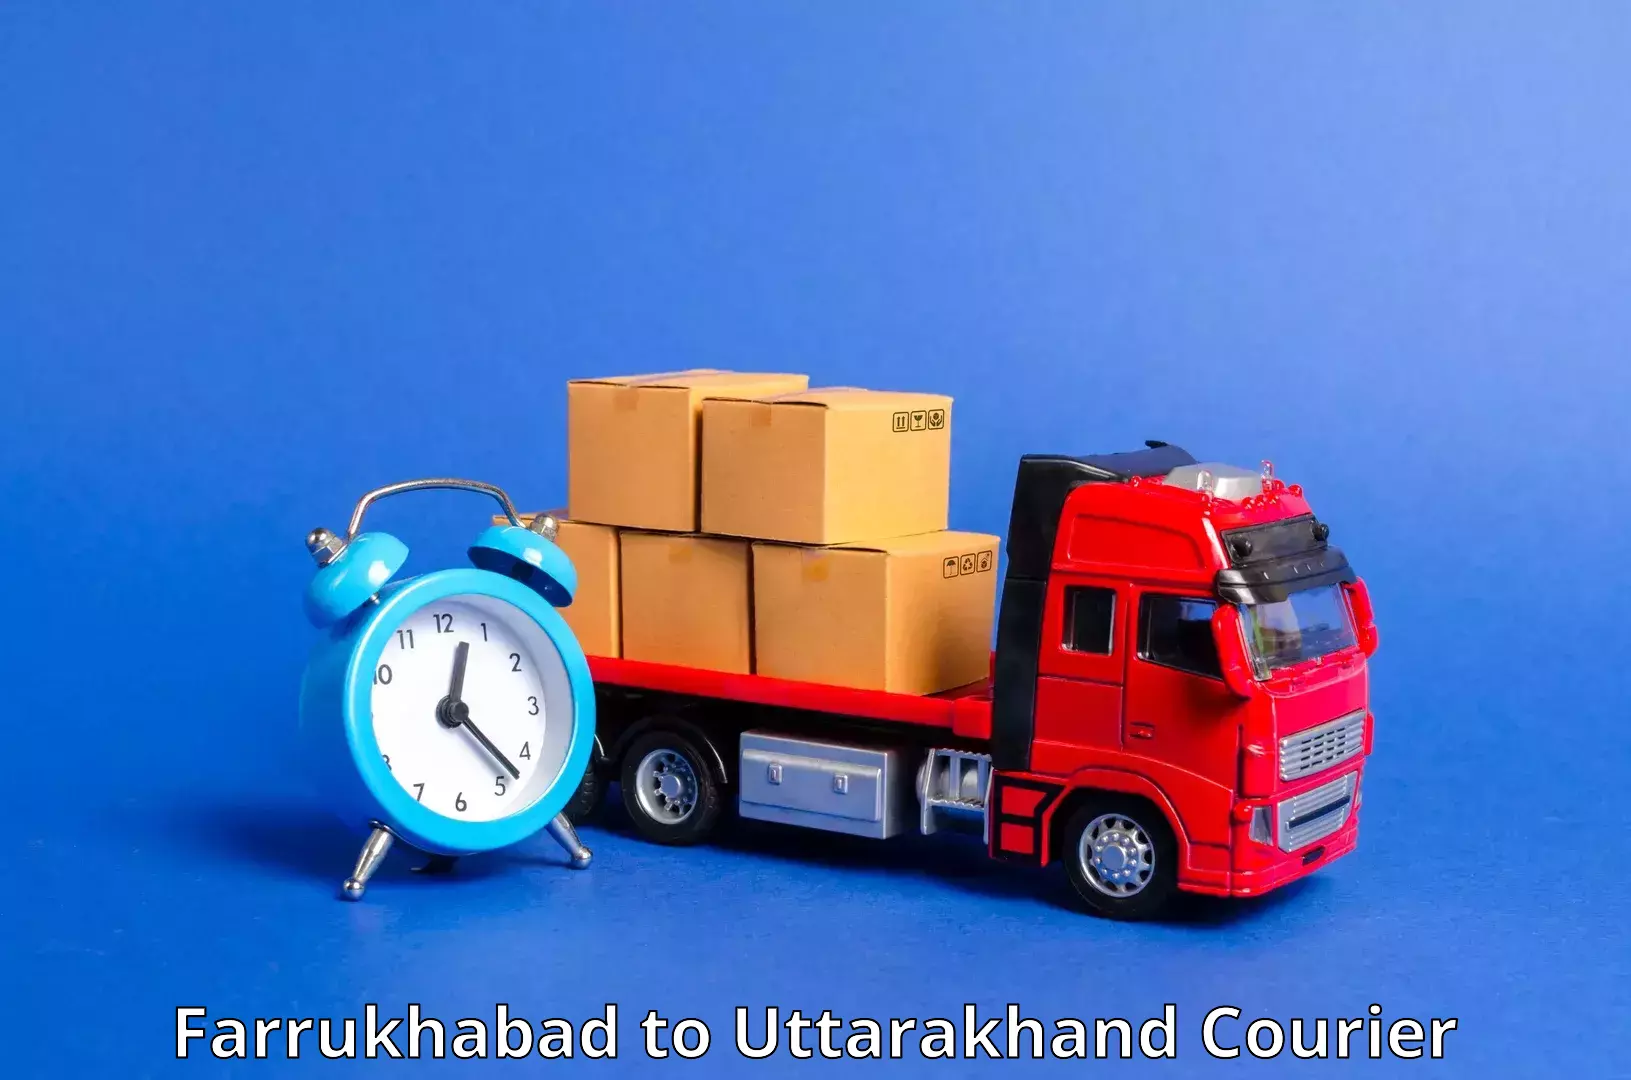 High-speed parcel service Farrukhabad to Ranikhet